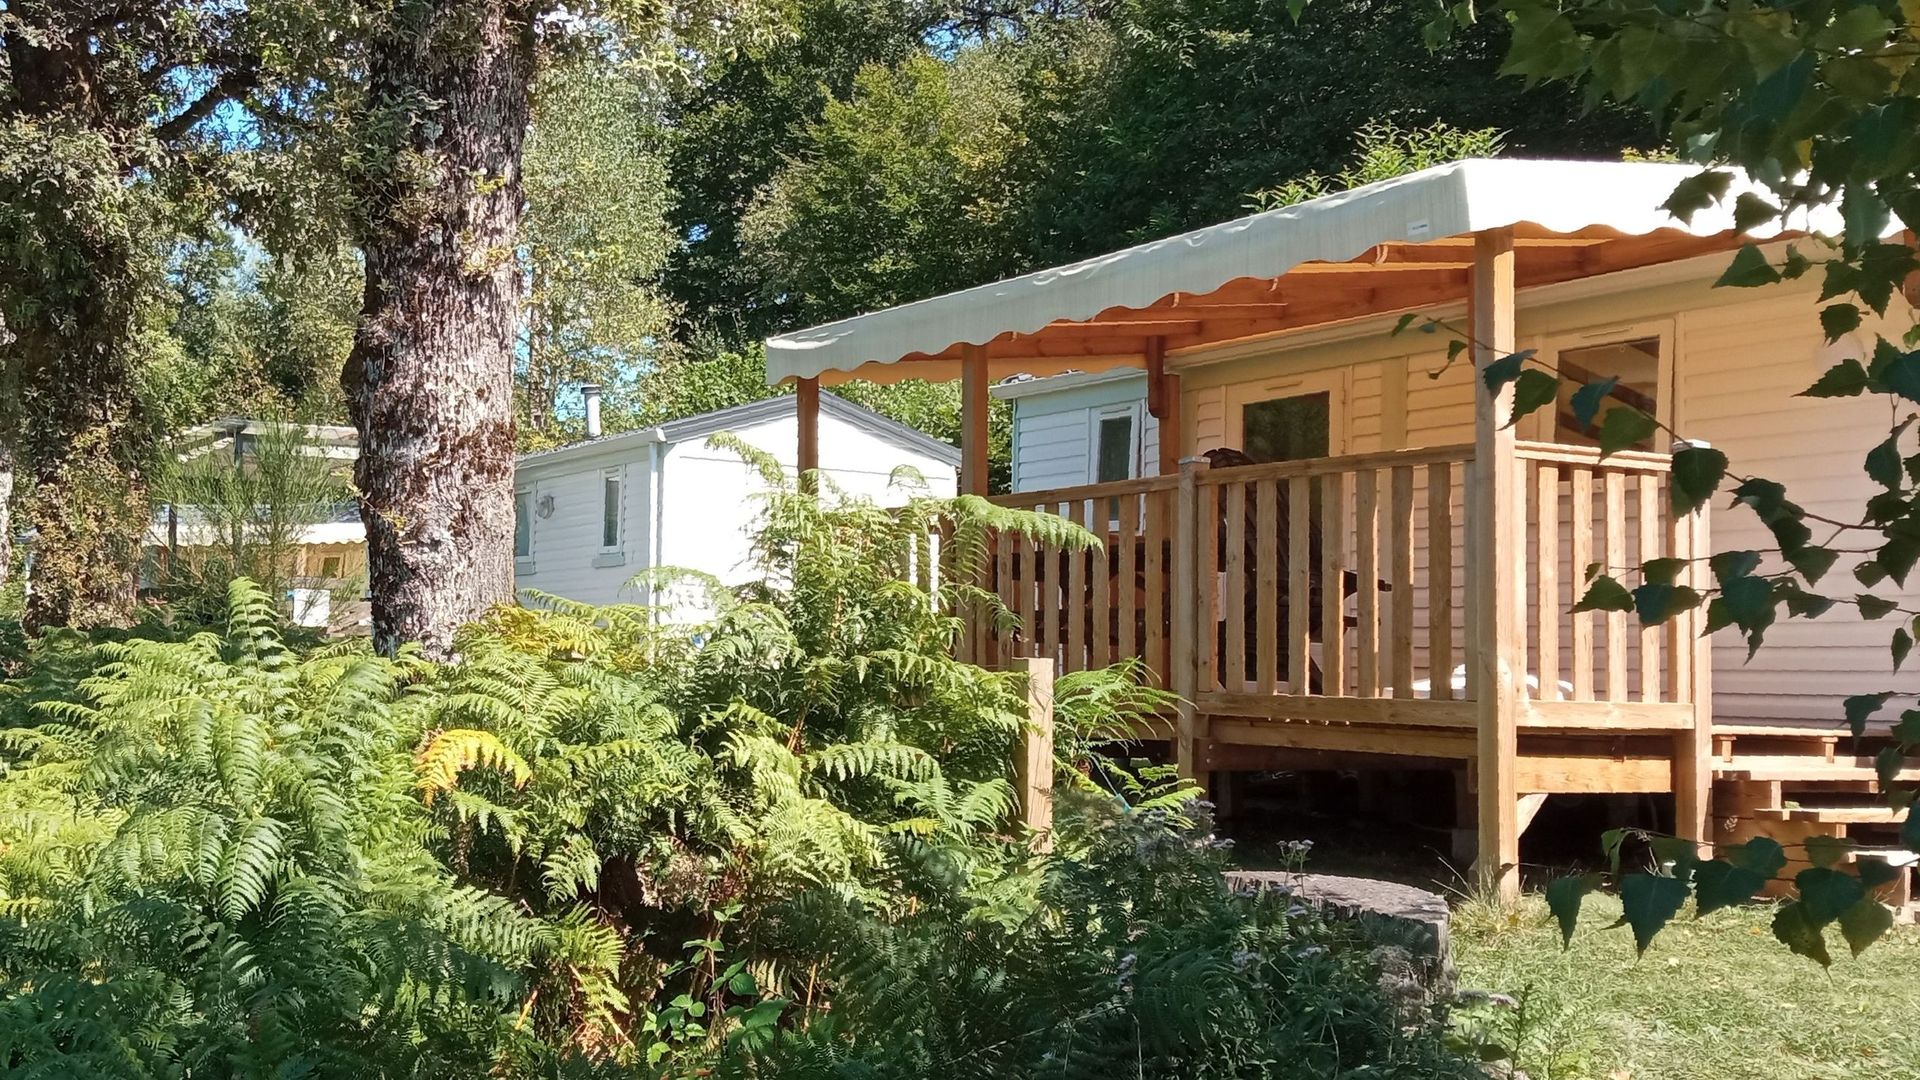 Book a mobilhome by a lake in aveyron